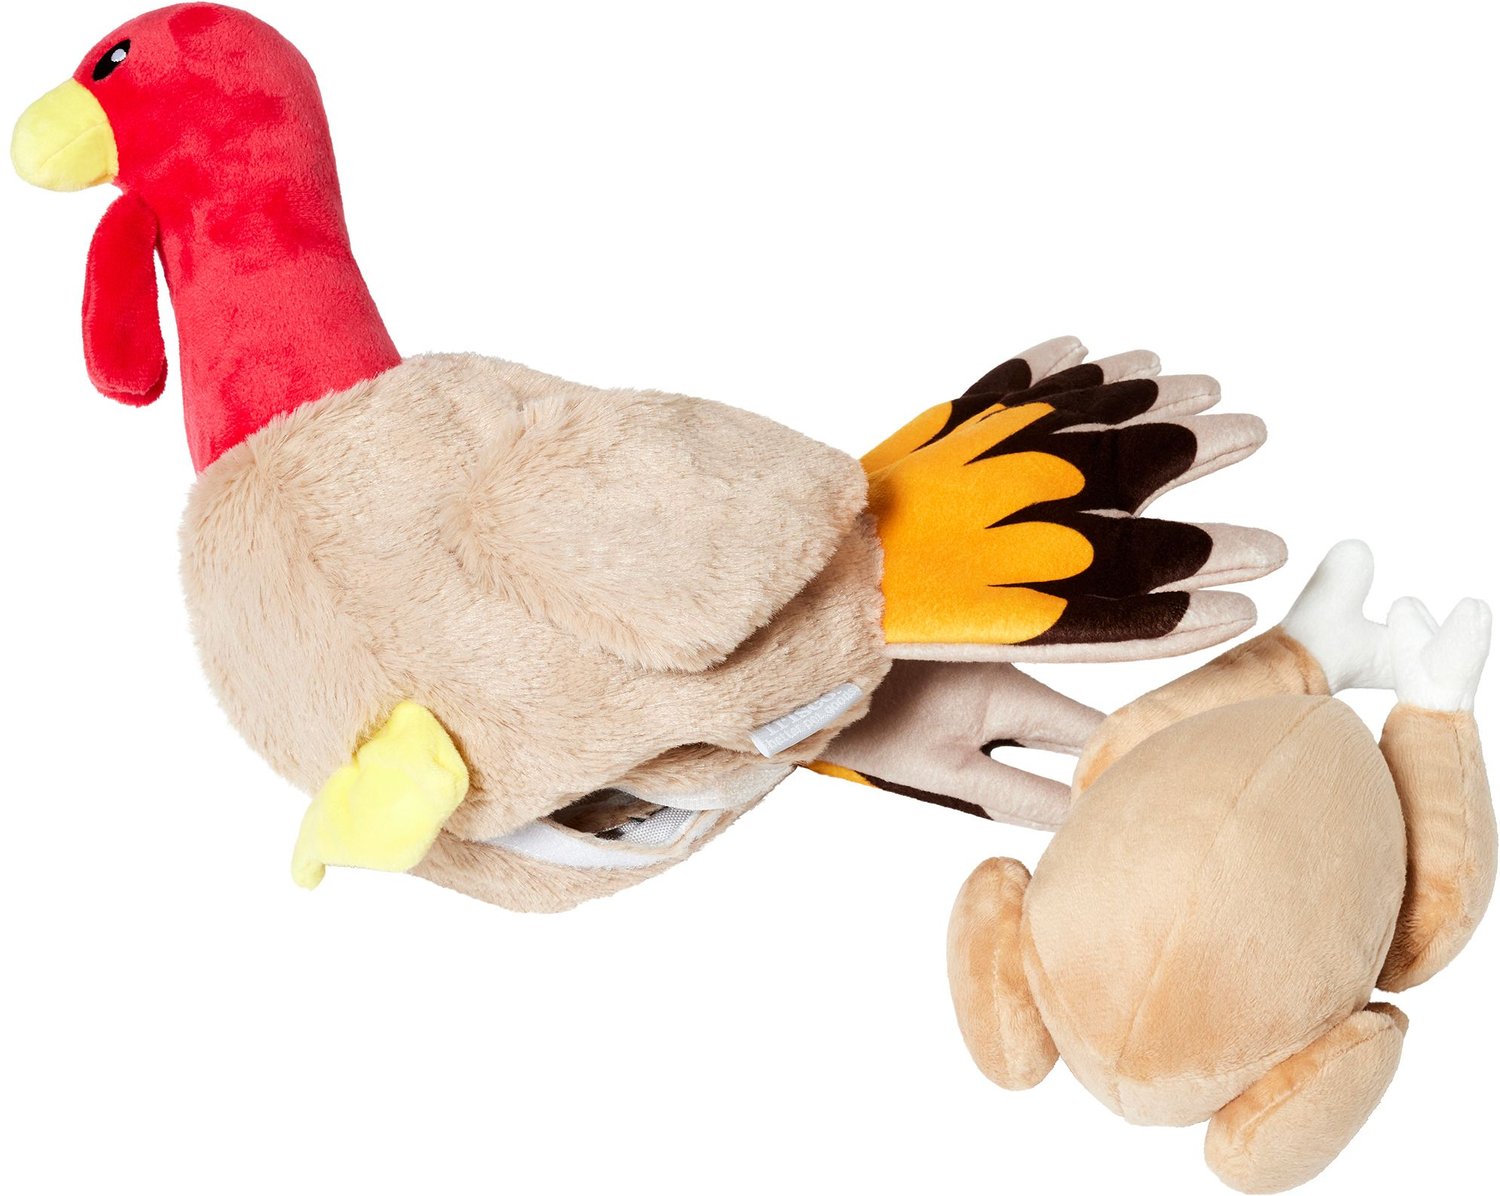 Thanksgiving Tur Monken for Dog Toy Pulling tugging 5 squeakers 